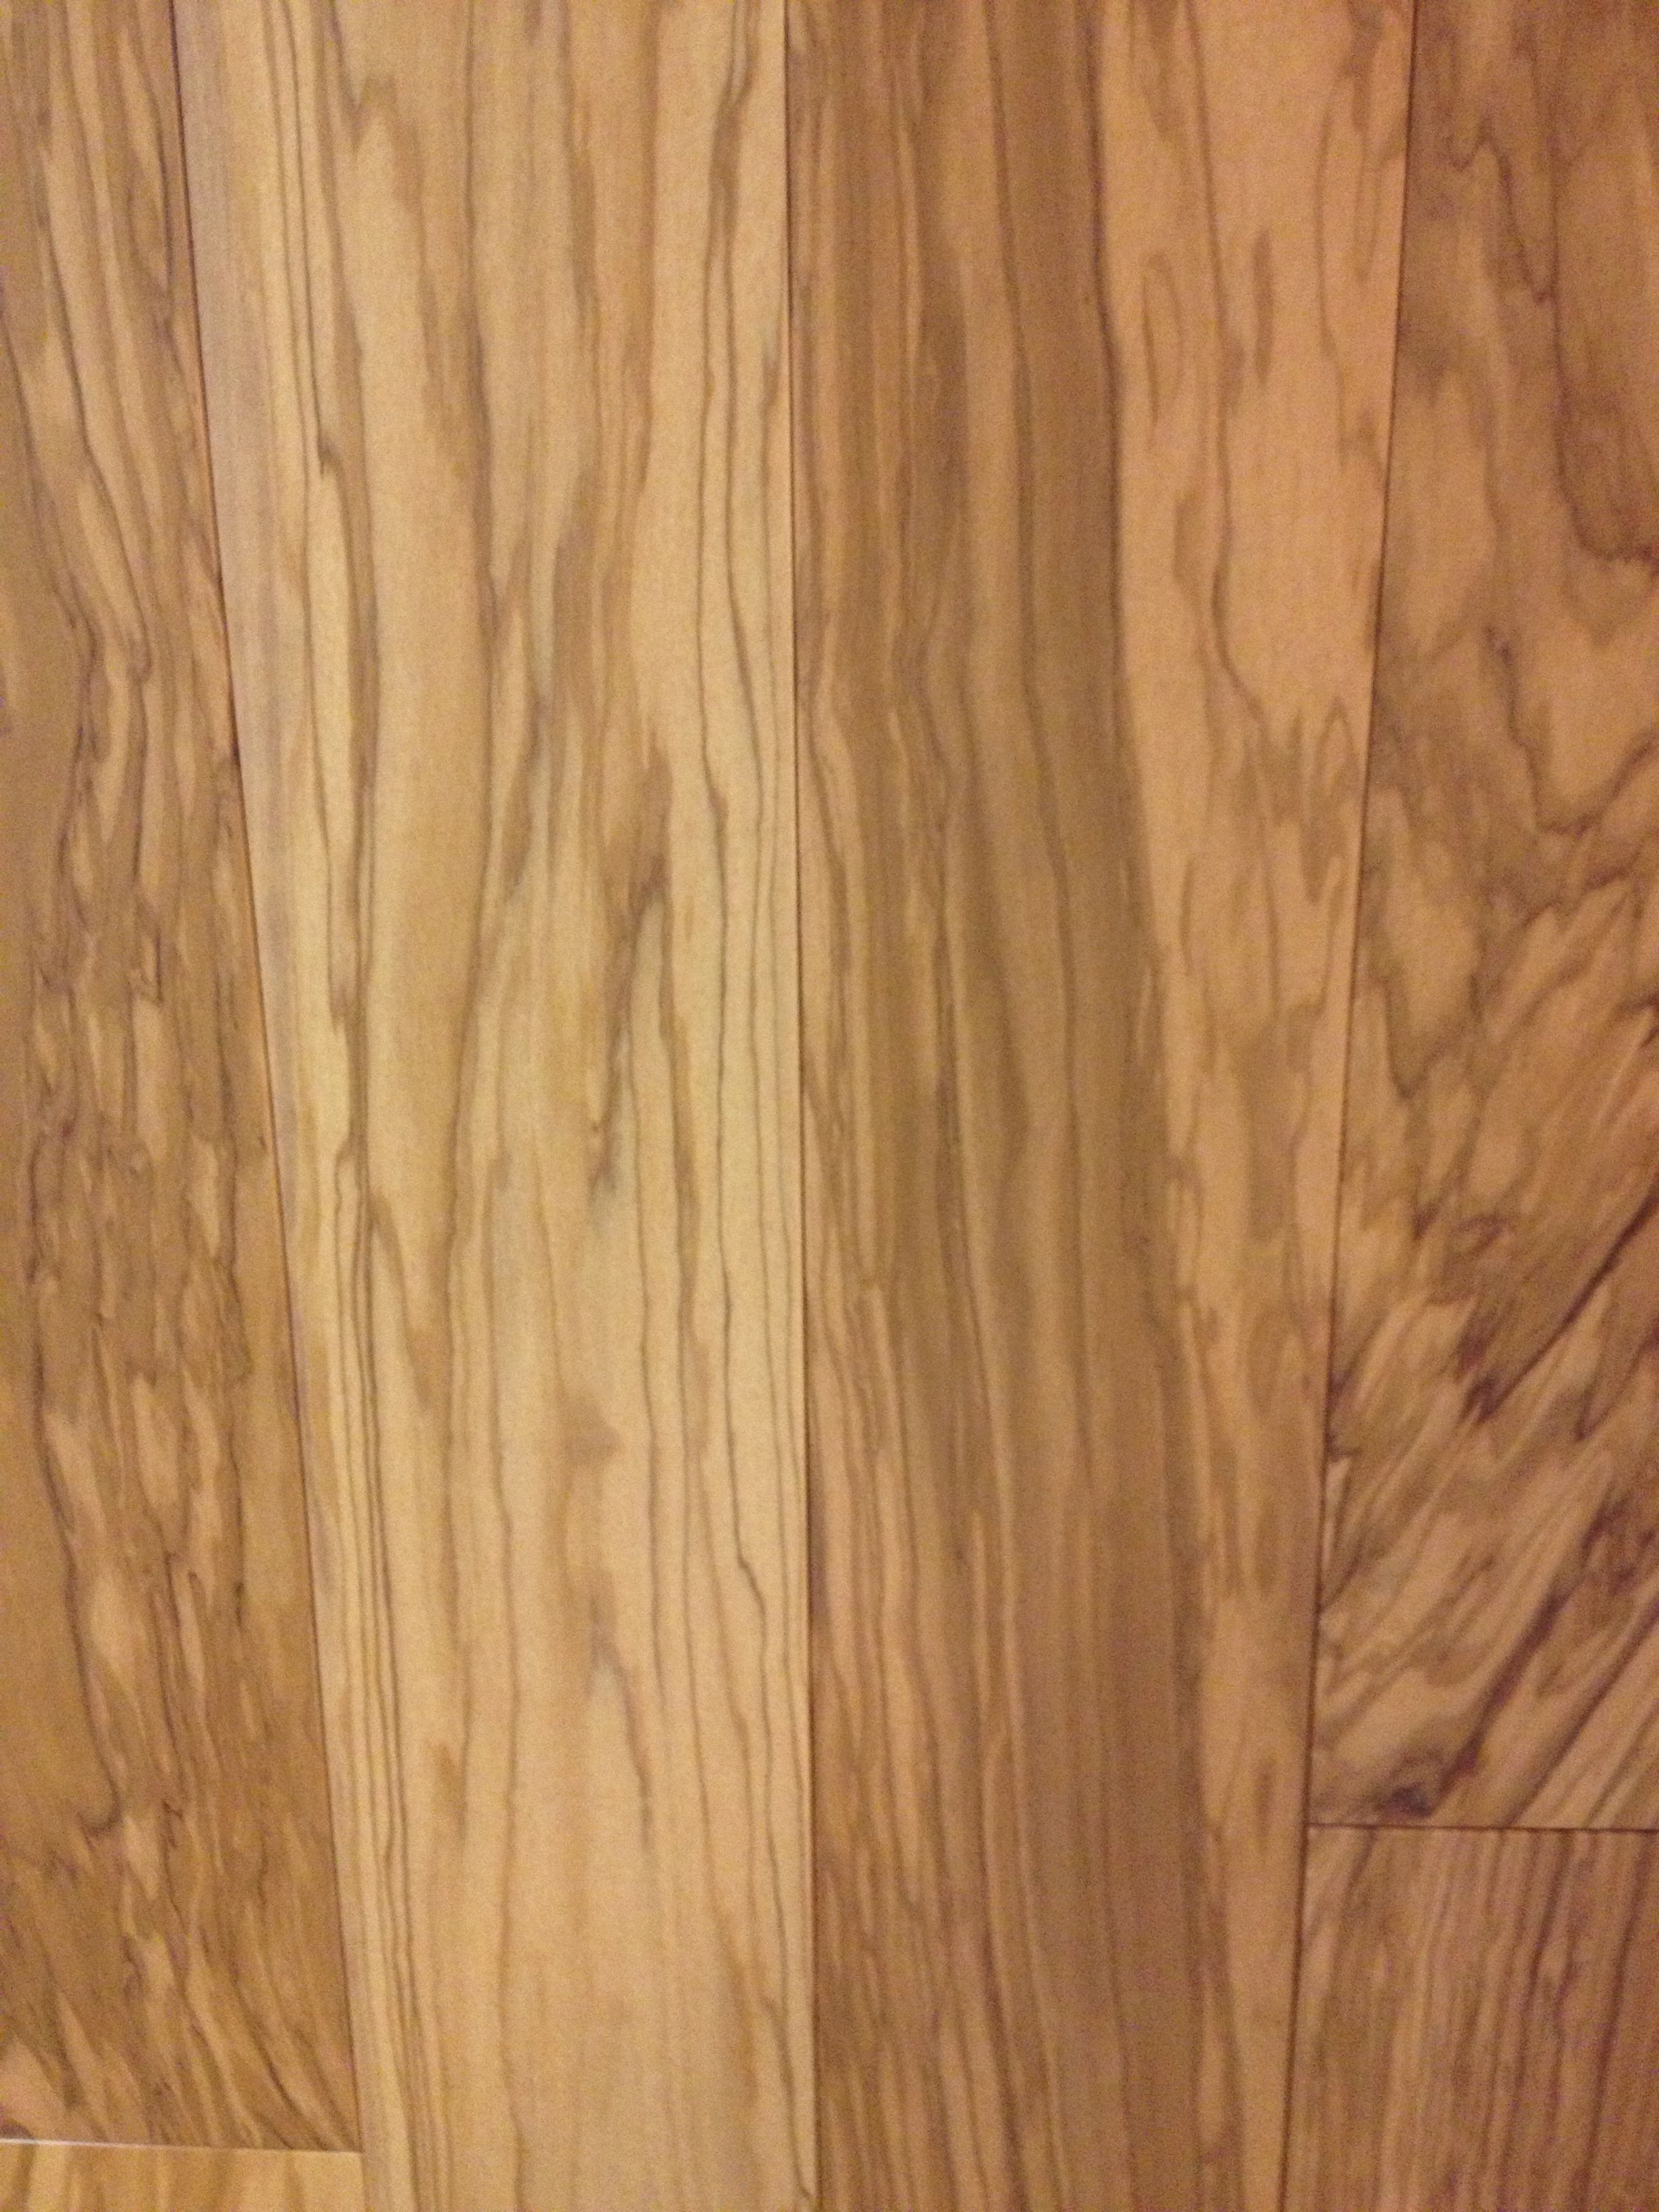 11 Lovable Hardwood Flooring Mississauga Ontario 2024 free download hardwood flooring mississauga ontario of tuscany olive wood floor there is nothing quite like olive wood for inside tuscany olive wood floor there is nothing quite like olive wood for turnin